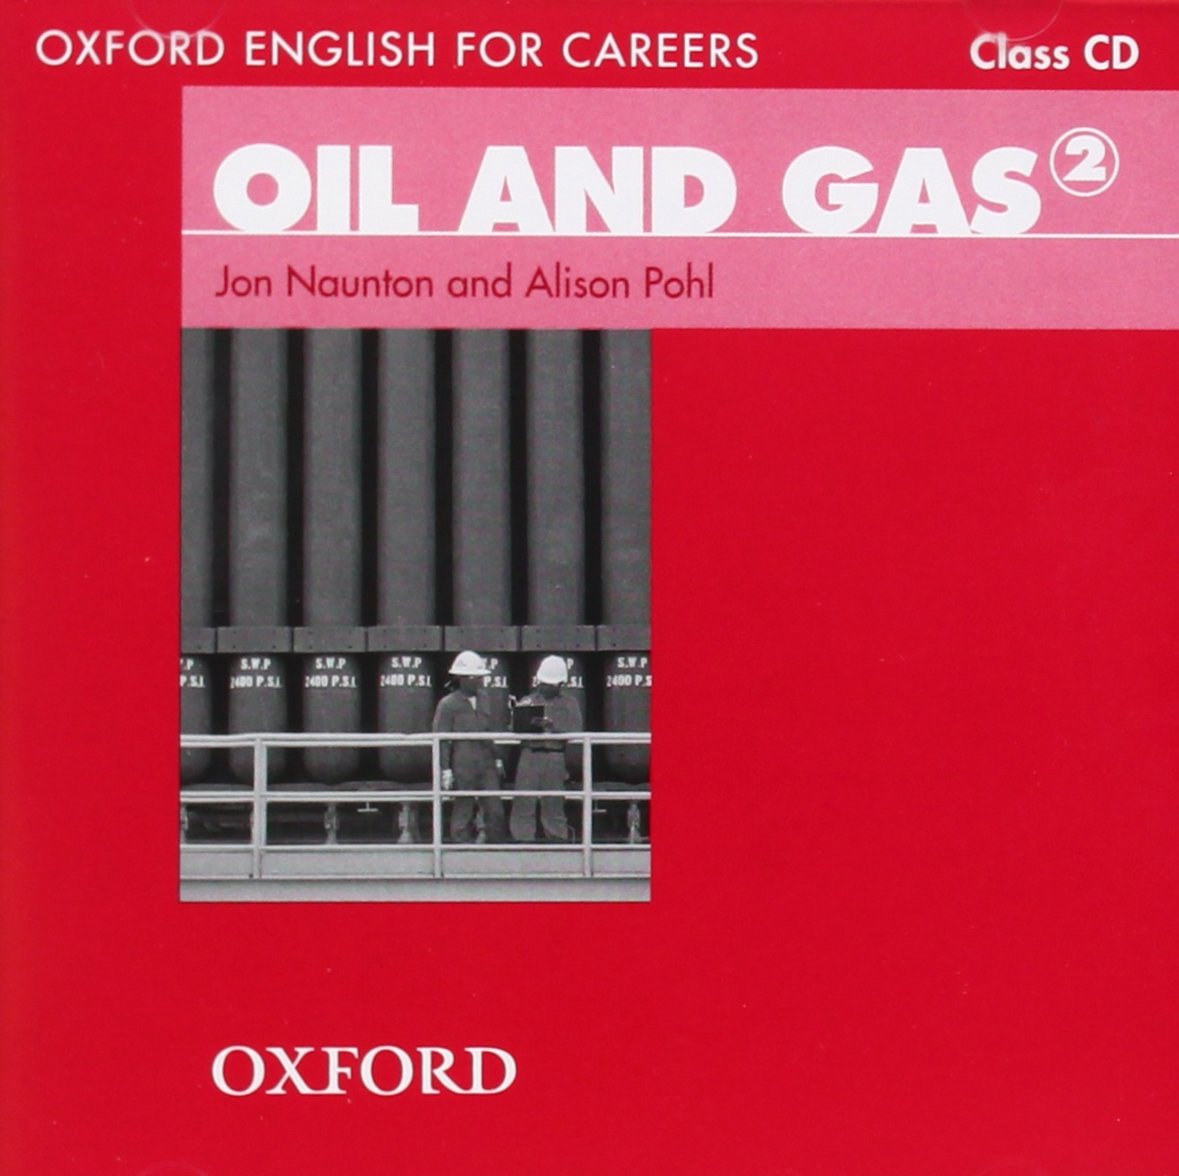 OIL AND GAS (OXFORD ENGLISH FOR CAREERS) 2 Class Audio CD 